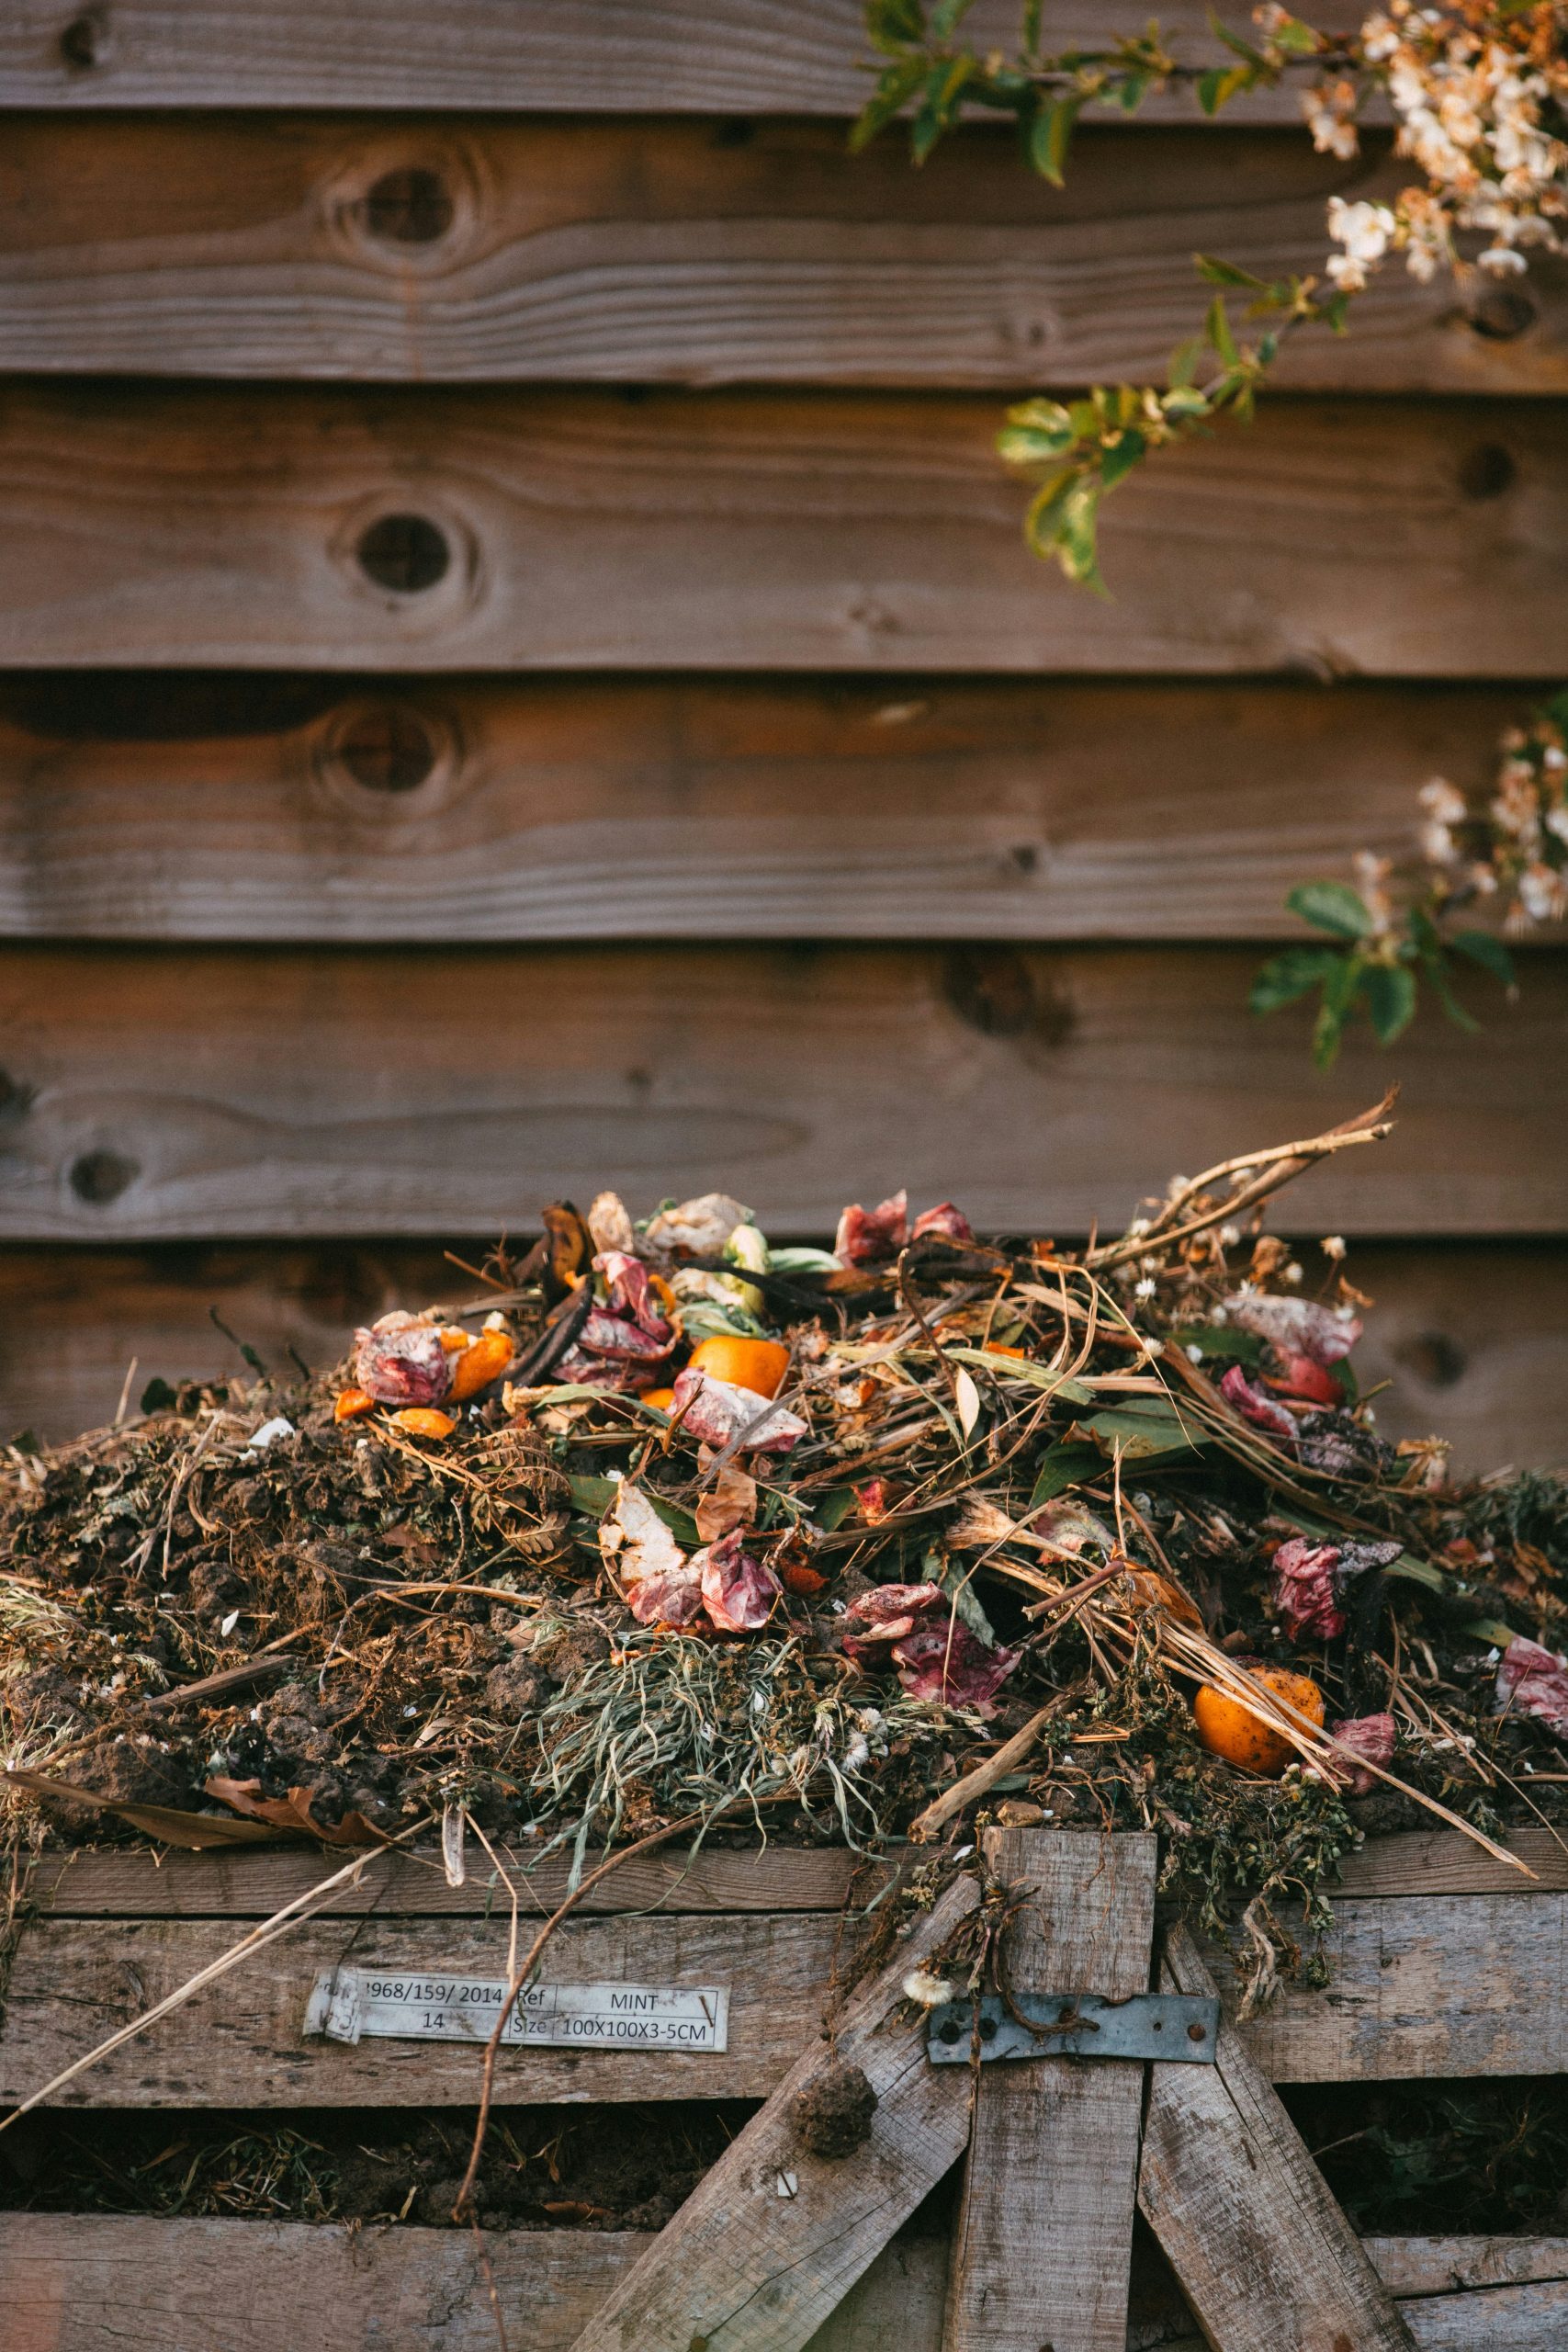 How Do I Maintain Moisture In My Compost Pile?